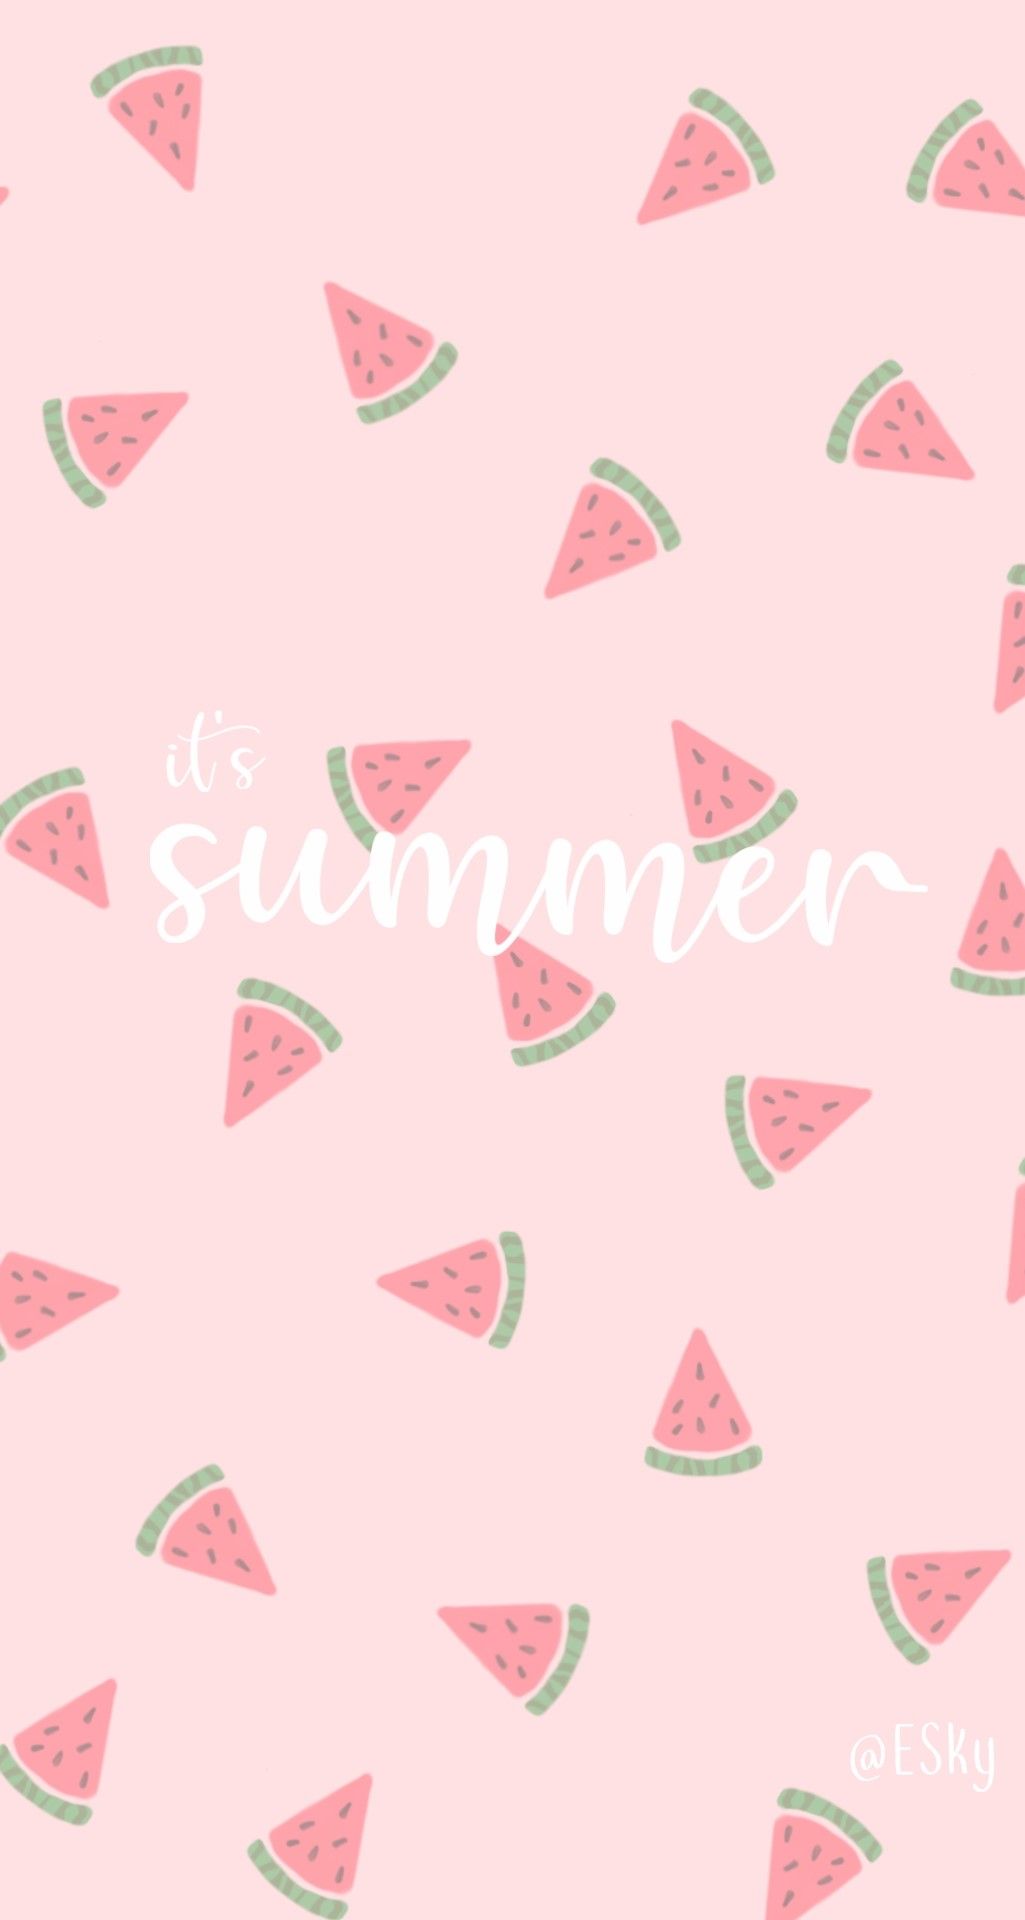 A pink background with watermelon slices on it - Watermelon